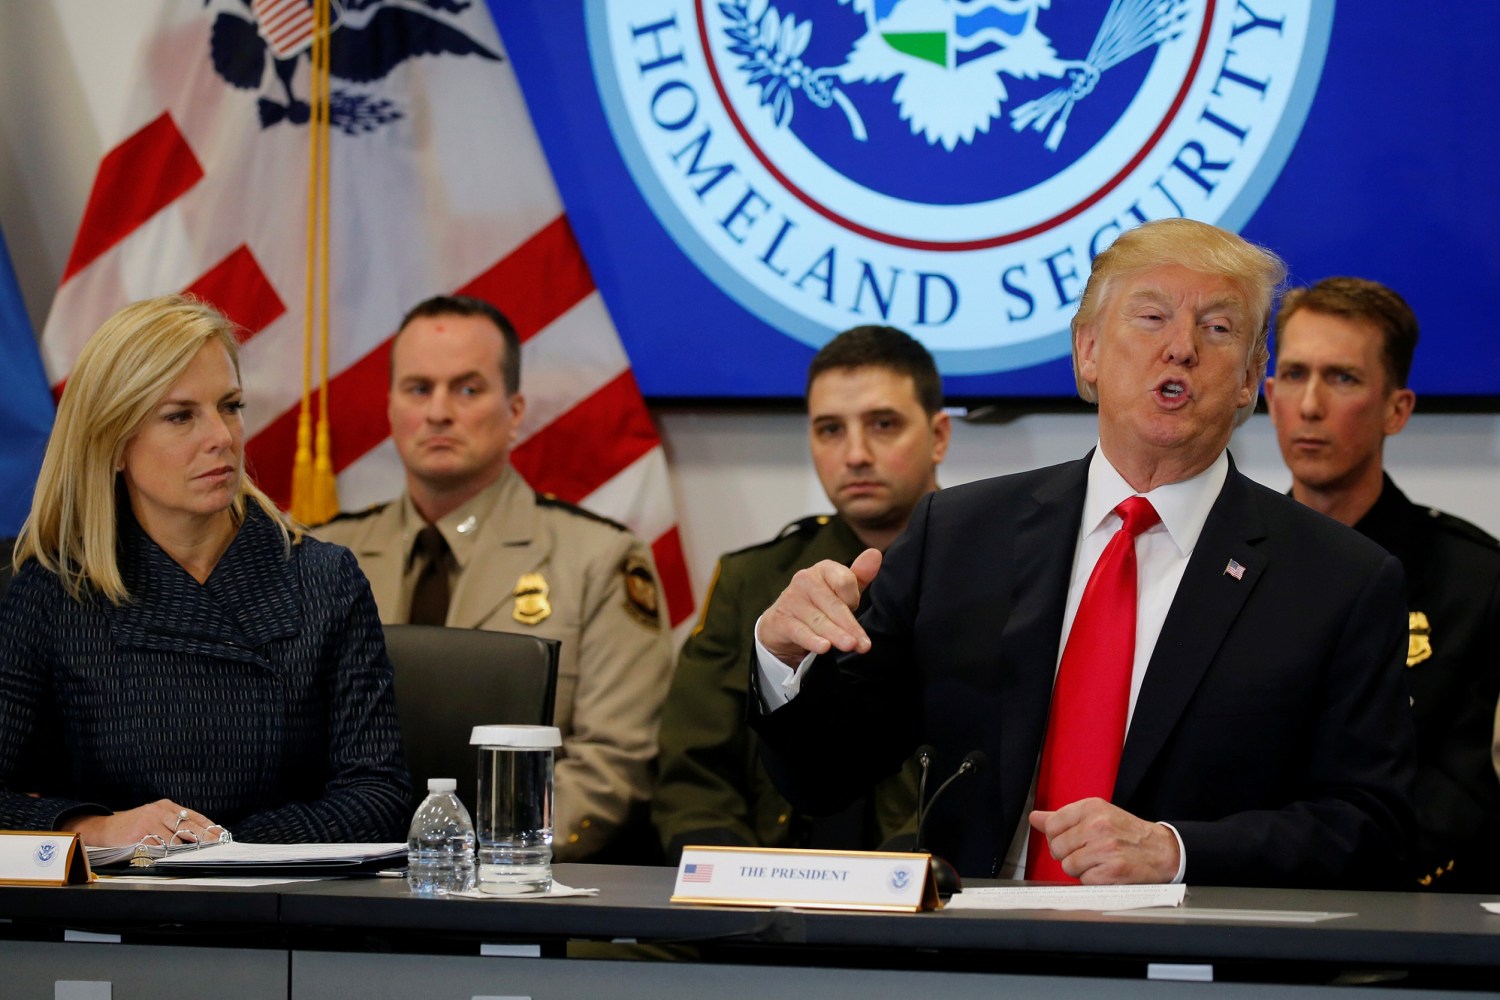 U.S. President Donald Trump, flanked by Secretary of Homeland Security Kirstjen Nielsen (L), holds a meeting at the U.S. Customs and Border Protection's National Targeting Center in Sterling, Virginia, U.S. February 2, 2018. REUTERS/Jonathan Ernst - RC1DC1FFCA00